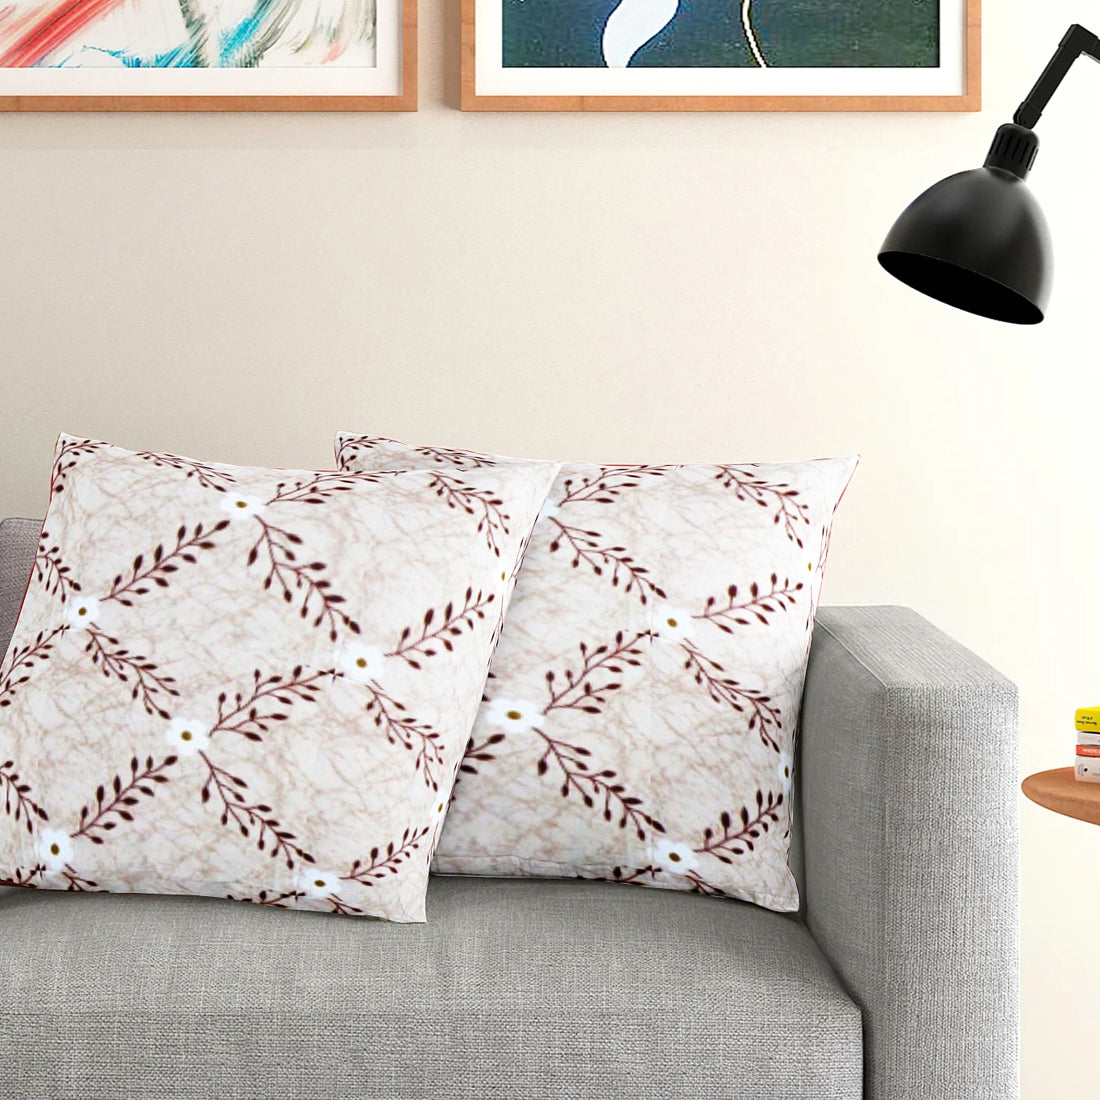 Soft Floral print Coffee Brown Cotton Cushion Cover Set online in India